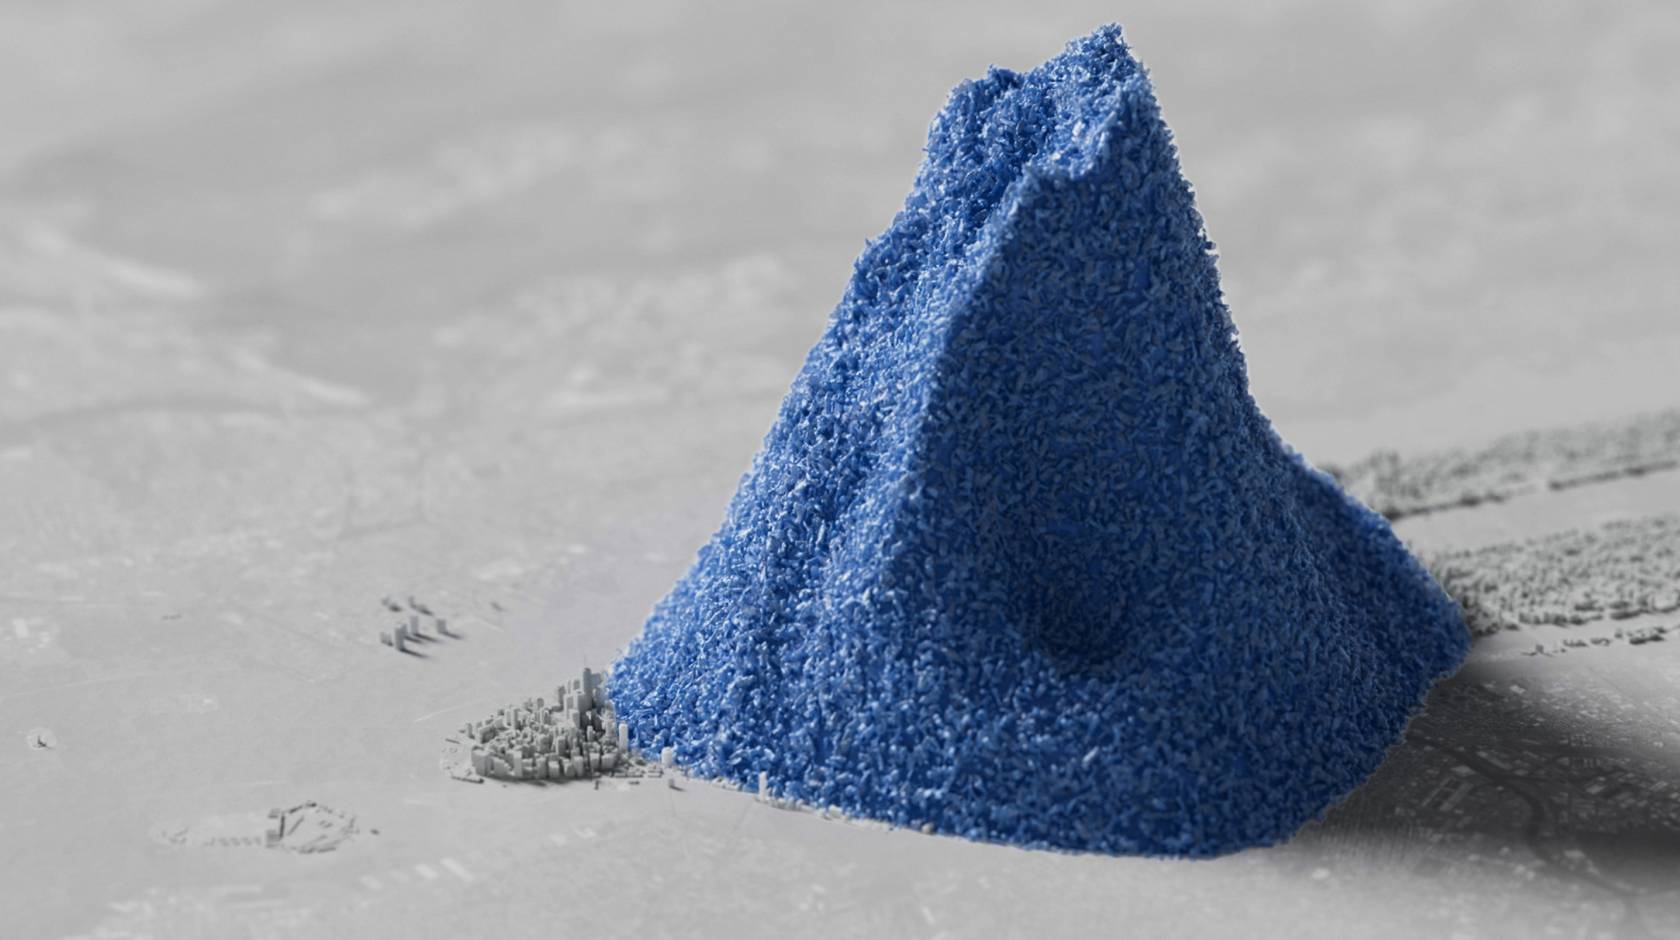 A computer-generated image of a pile of blue plastic beads dwarfing a colorless 3D rendering of Manhattan